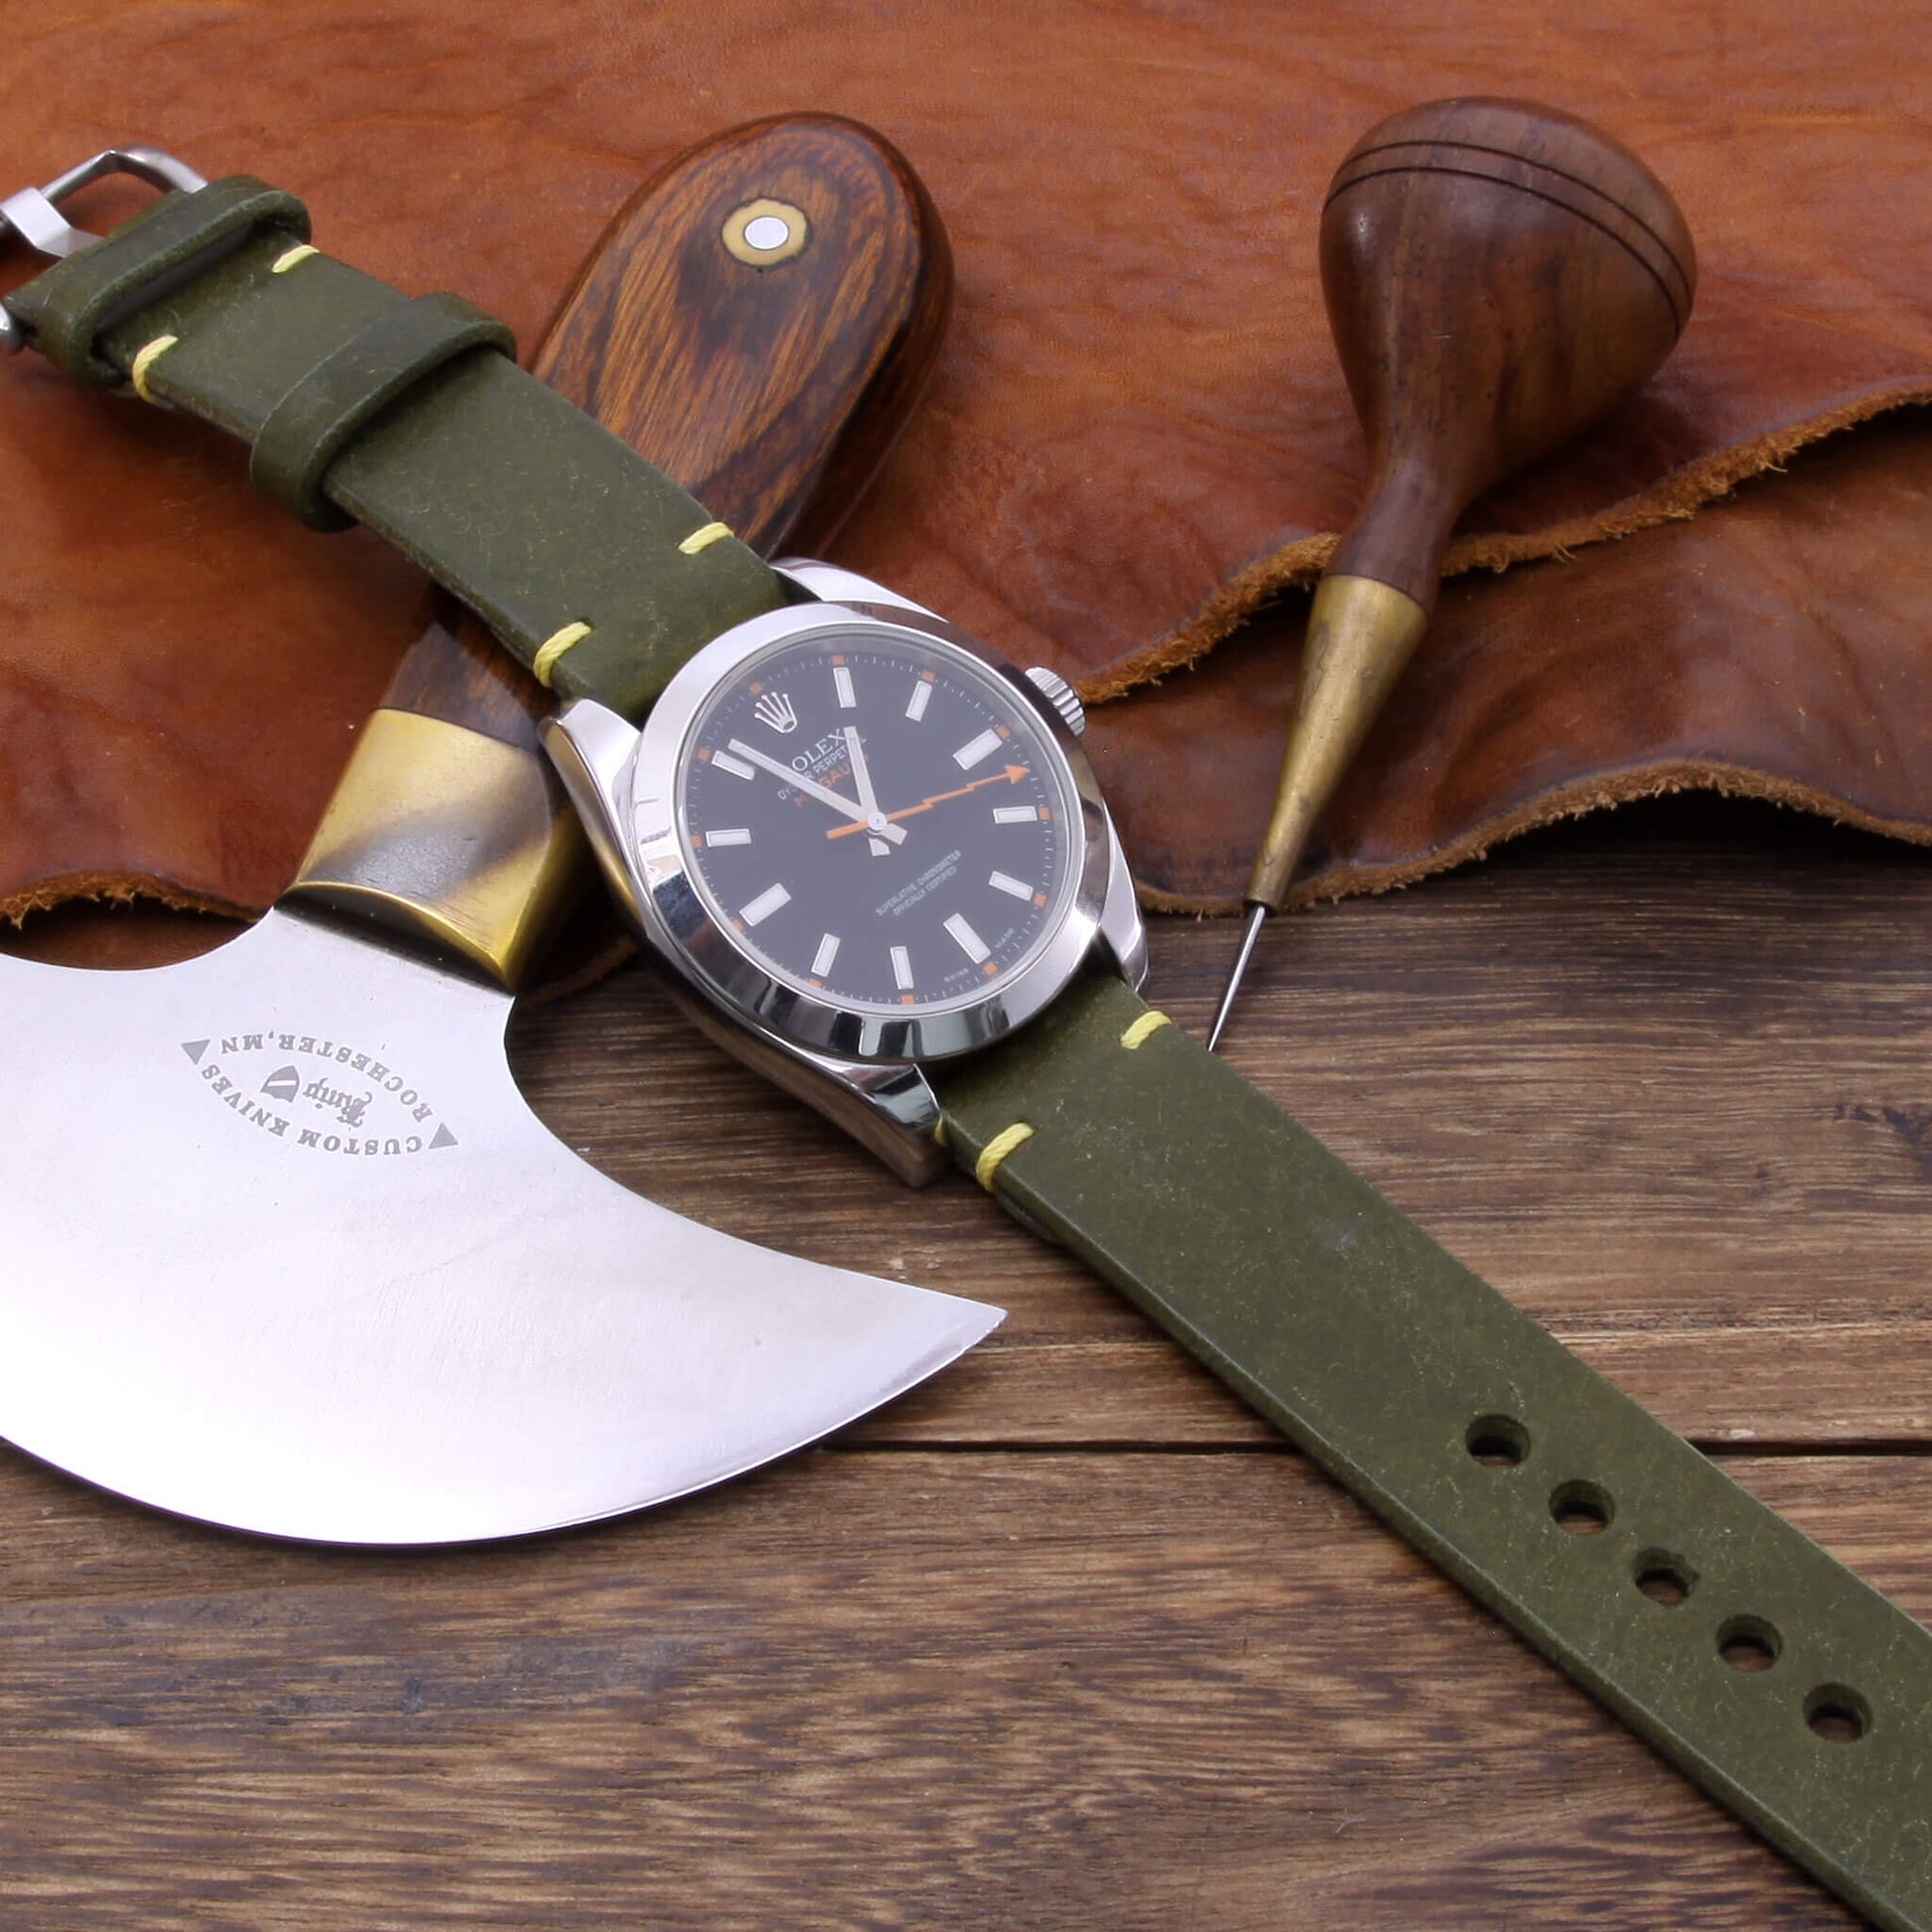 5th View of 2-Piece Minimalist Leather Watch Strap, made with Pueblo Oliva Italian veg-tanned leather by Cozy Handmade